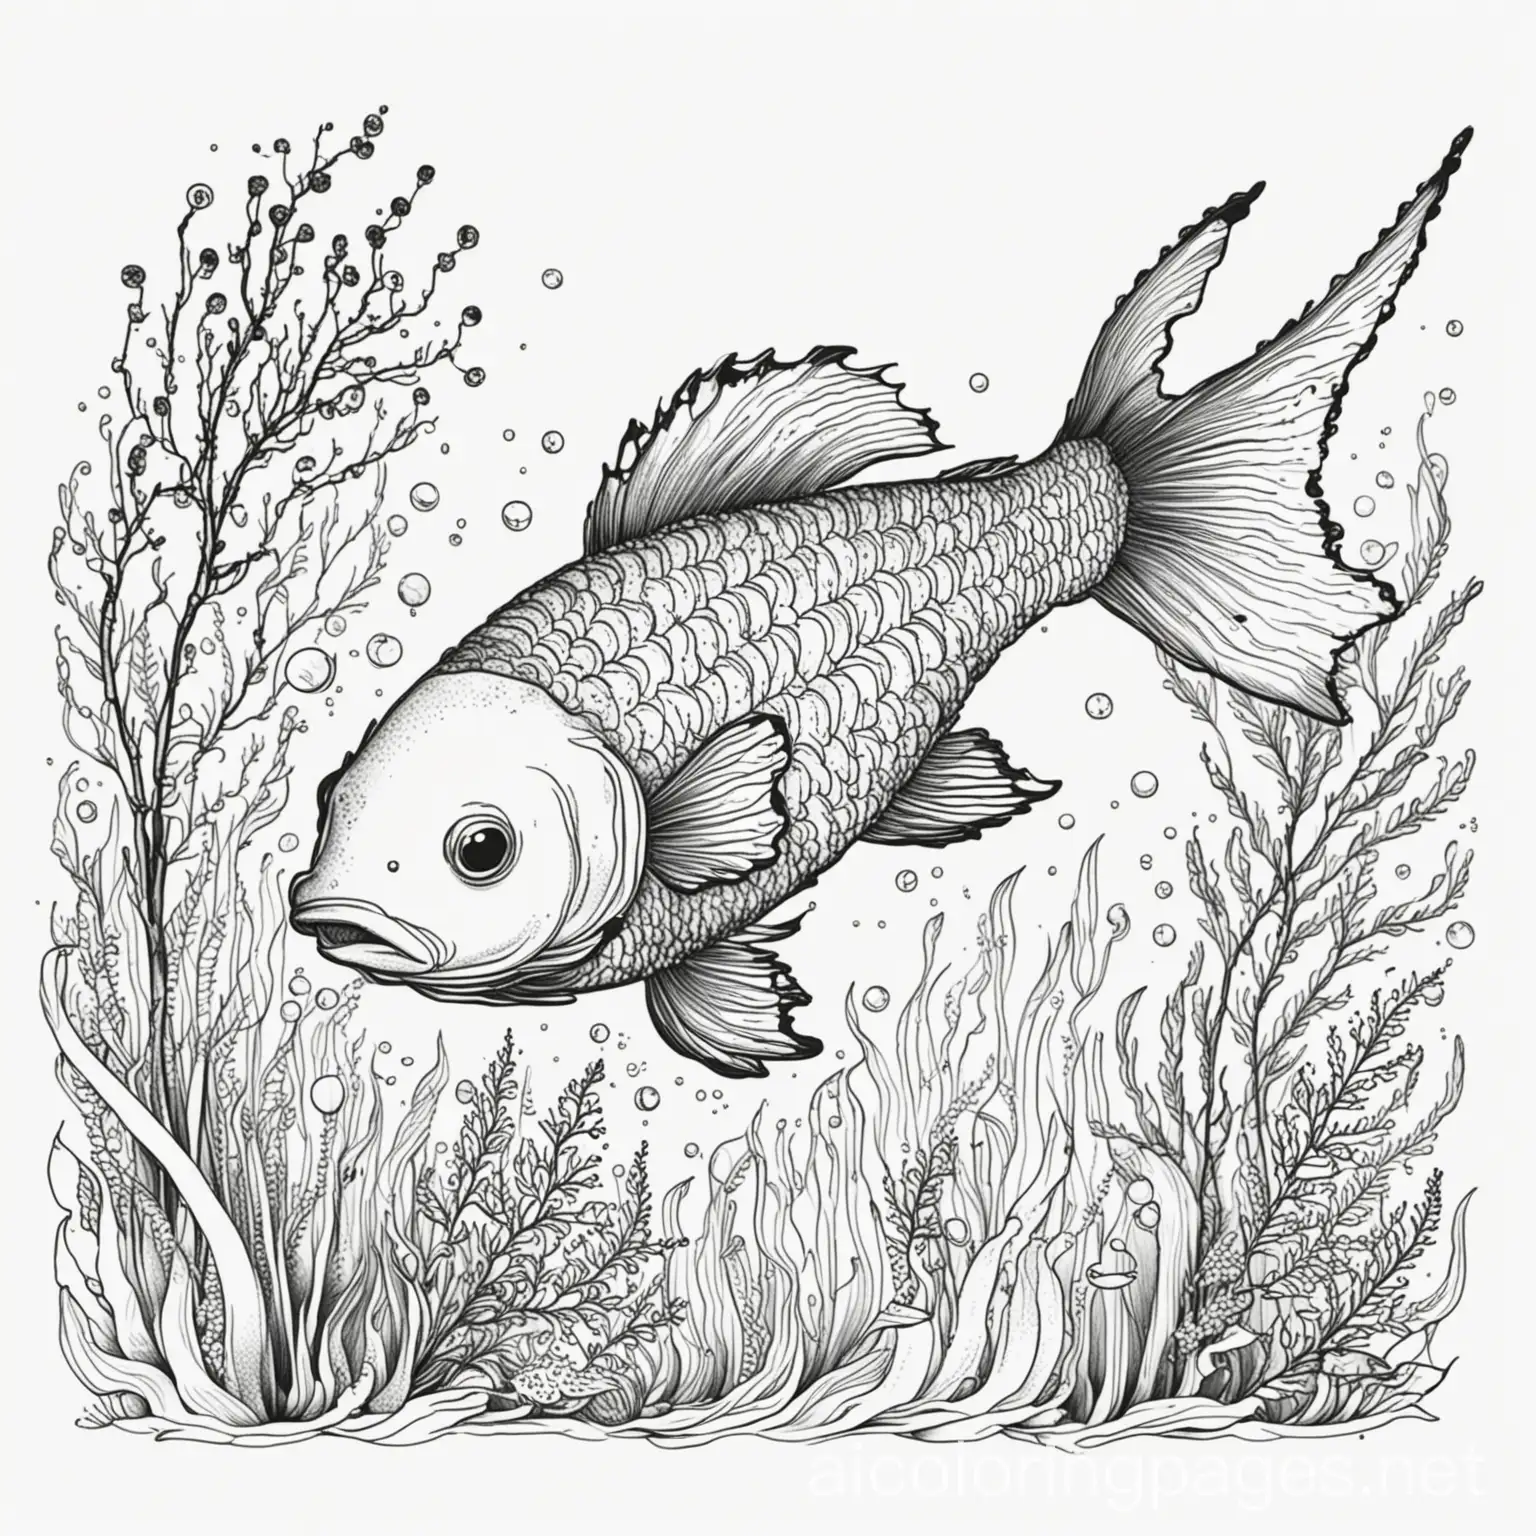 Fish and seaweed, Coloring Page, black and white, line art, white background, Simplicity, Ample White Space.